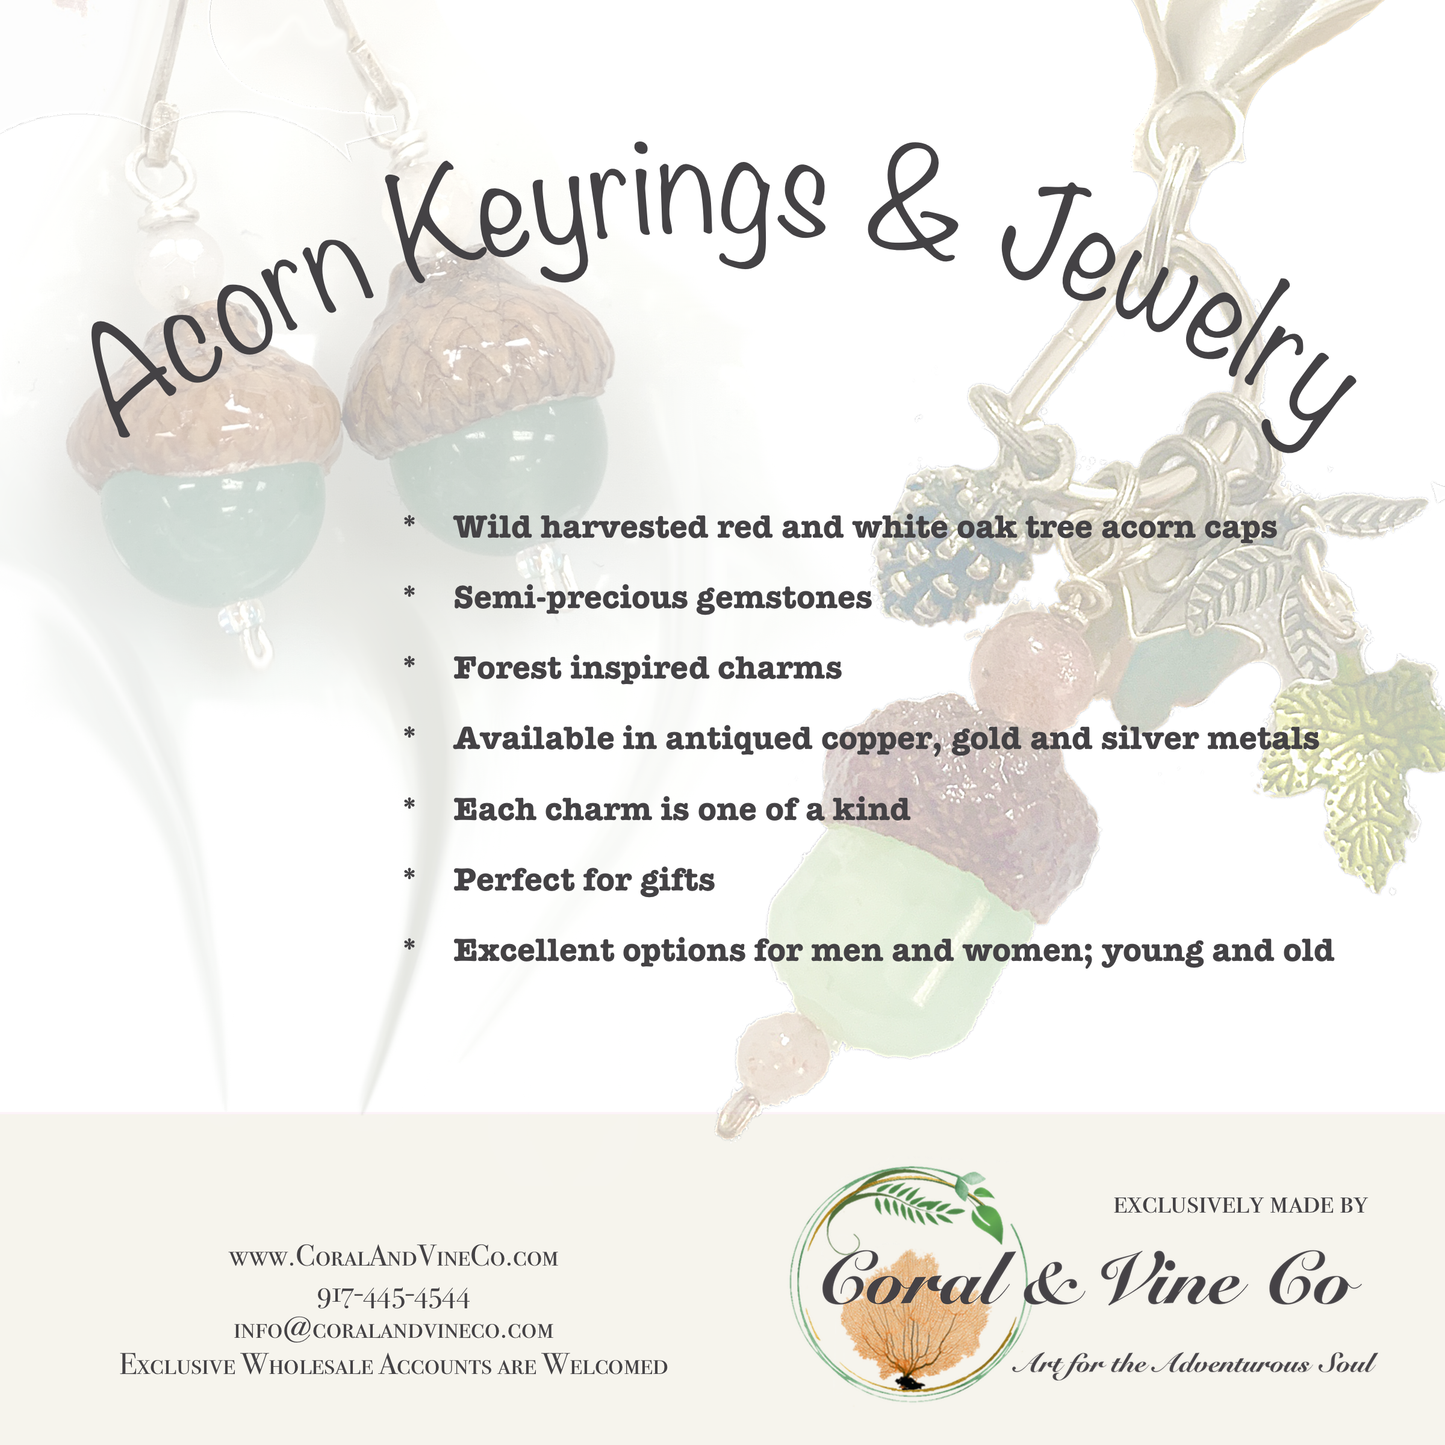 a flyer for acorn kettings and jewelry